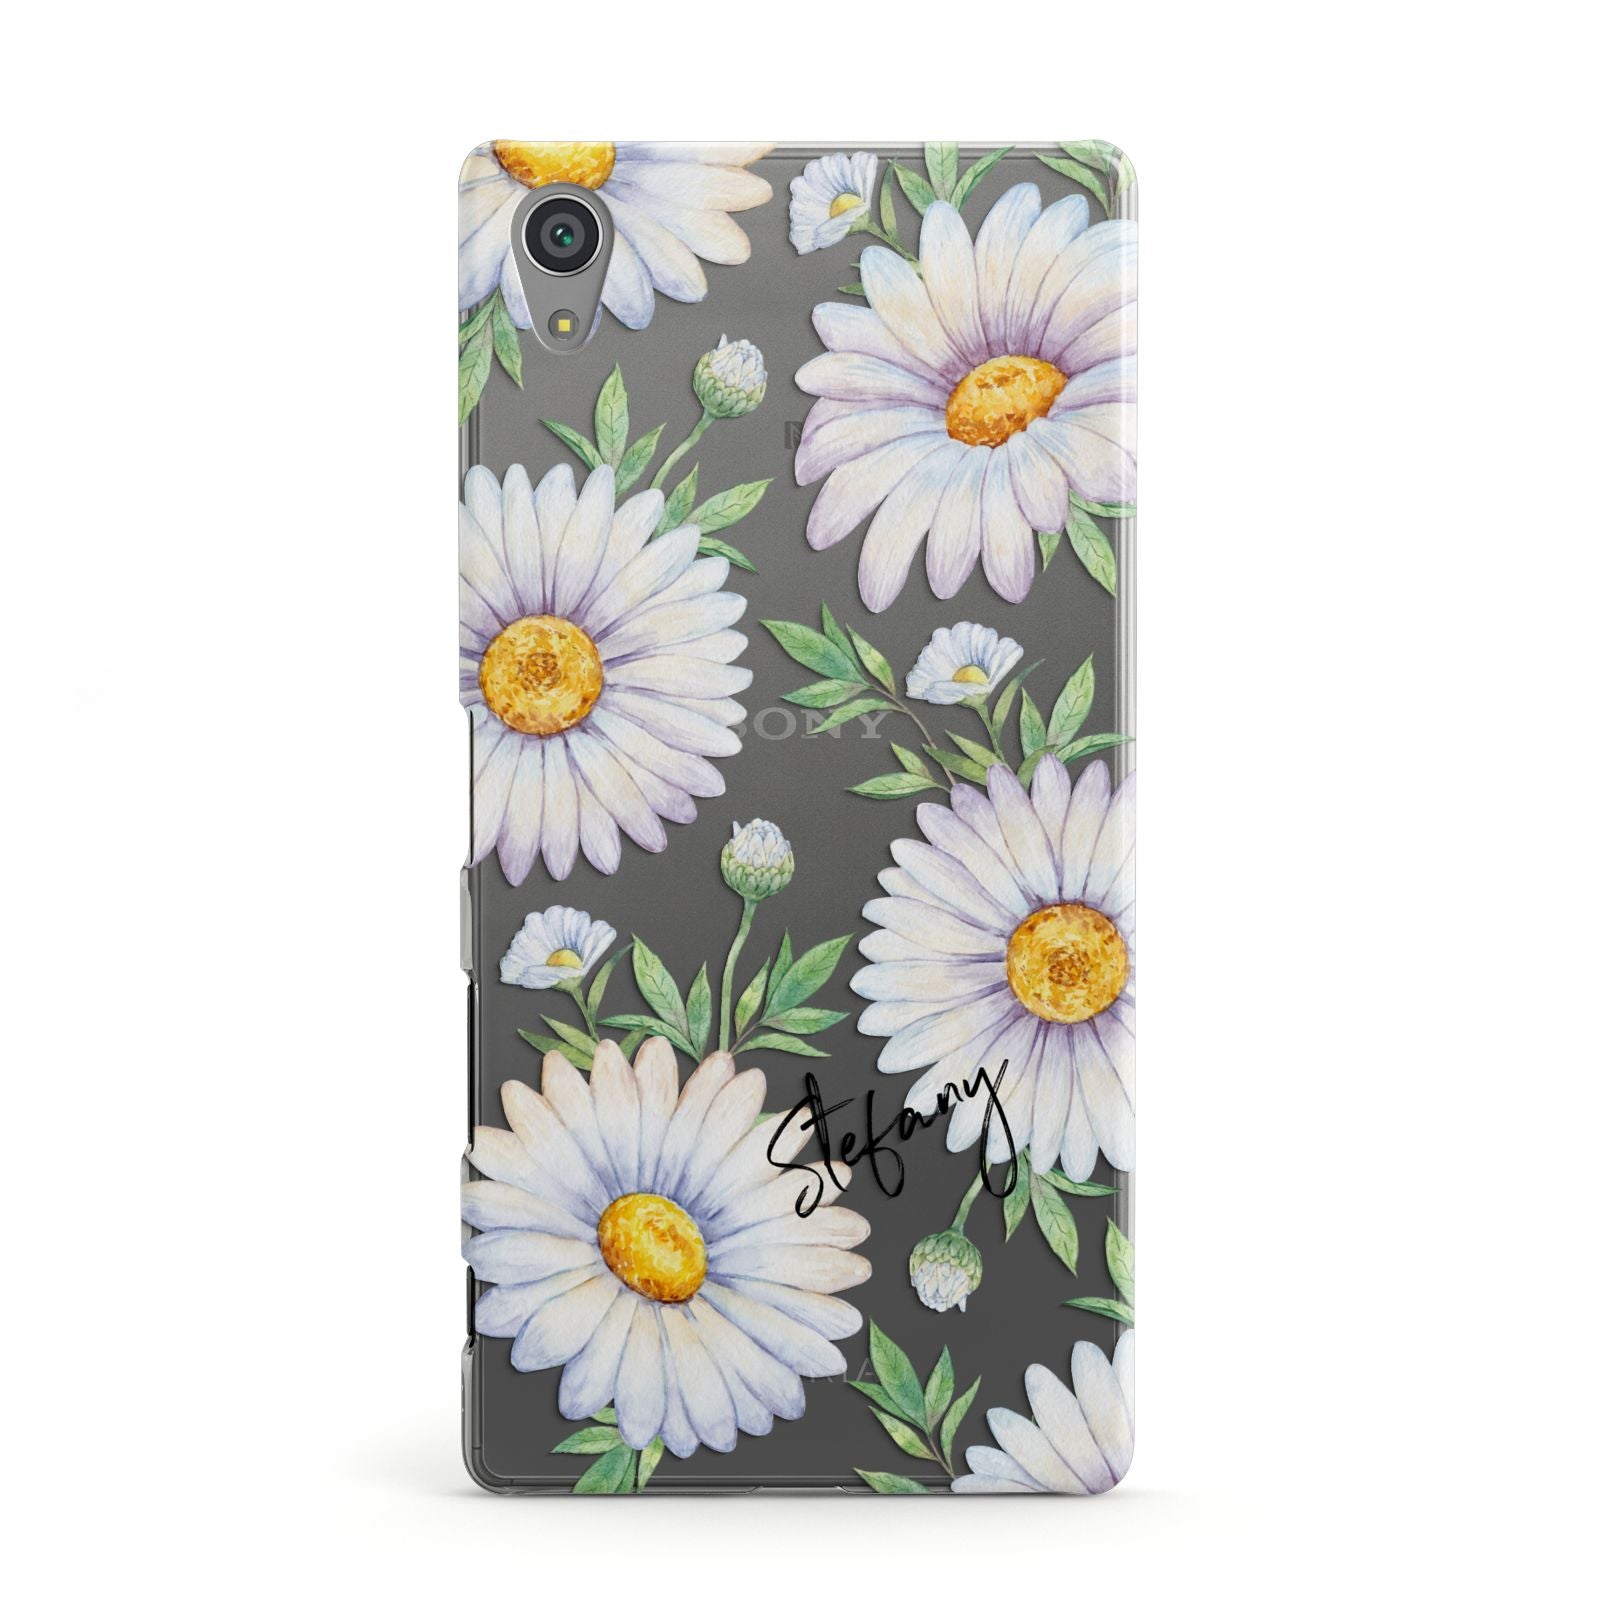 Personalised White Daisy Sony Xperia Case